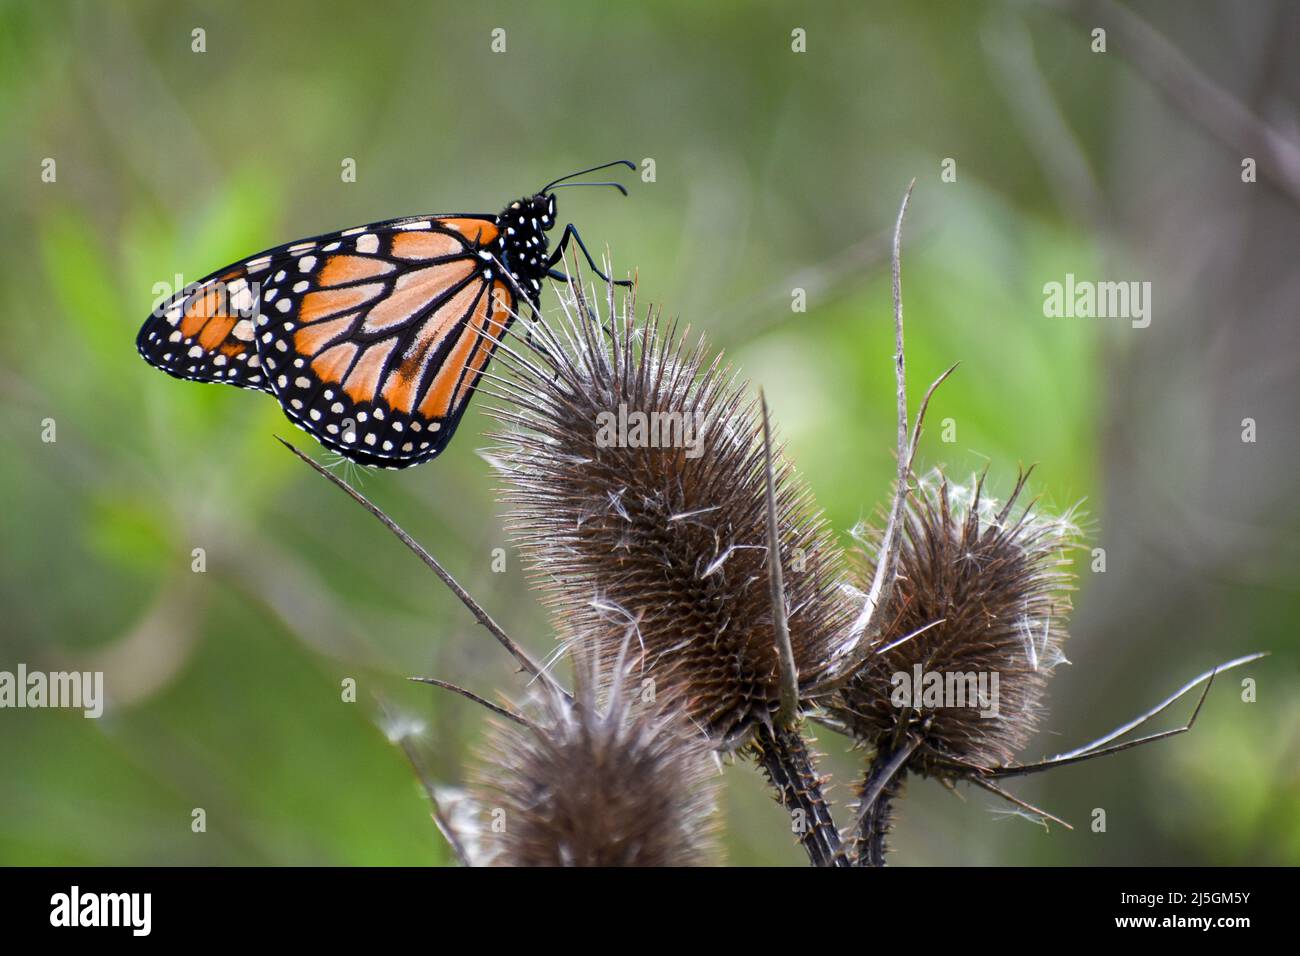 Southern monarch butterfly (Danaus erippus) home to Argentina, South America Stock Photo